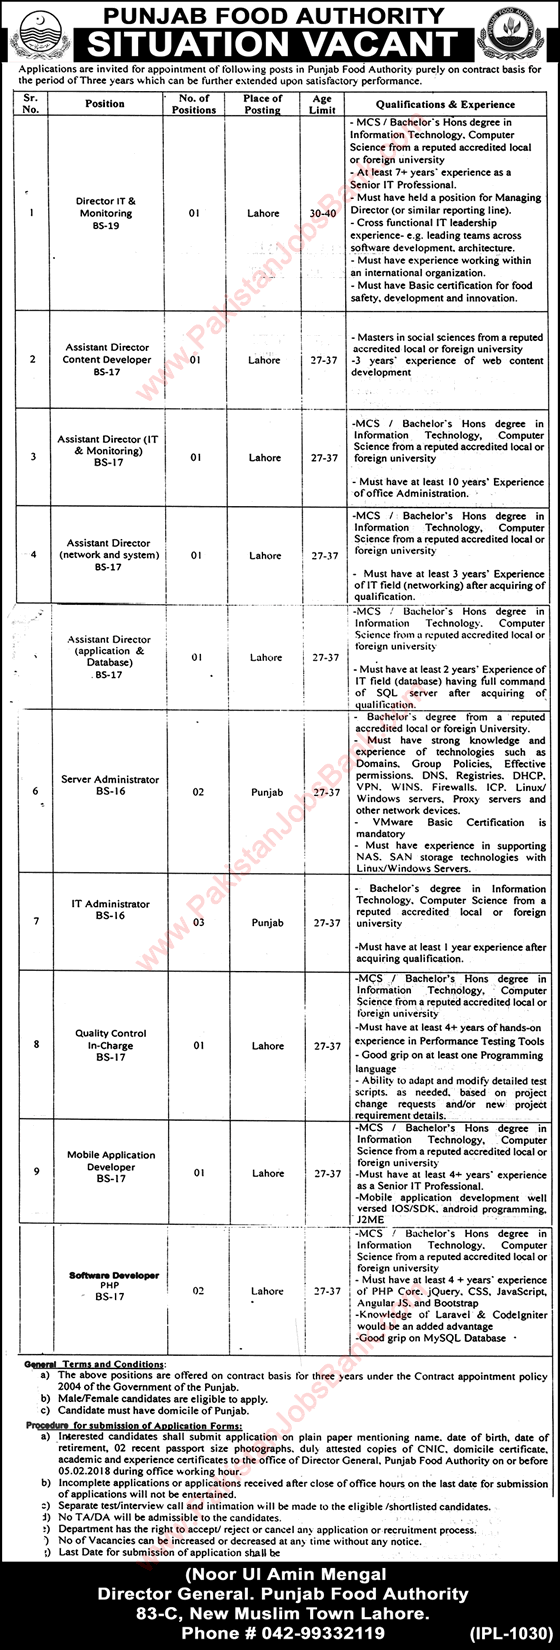 Punjab Food Authority Jobs 2018 IT / Server Administrators, Software Developers & Others Latest